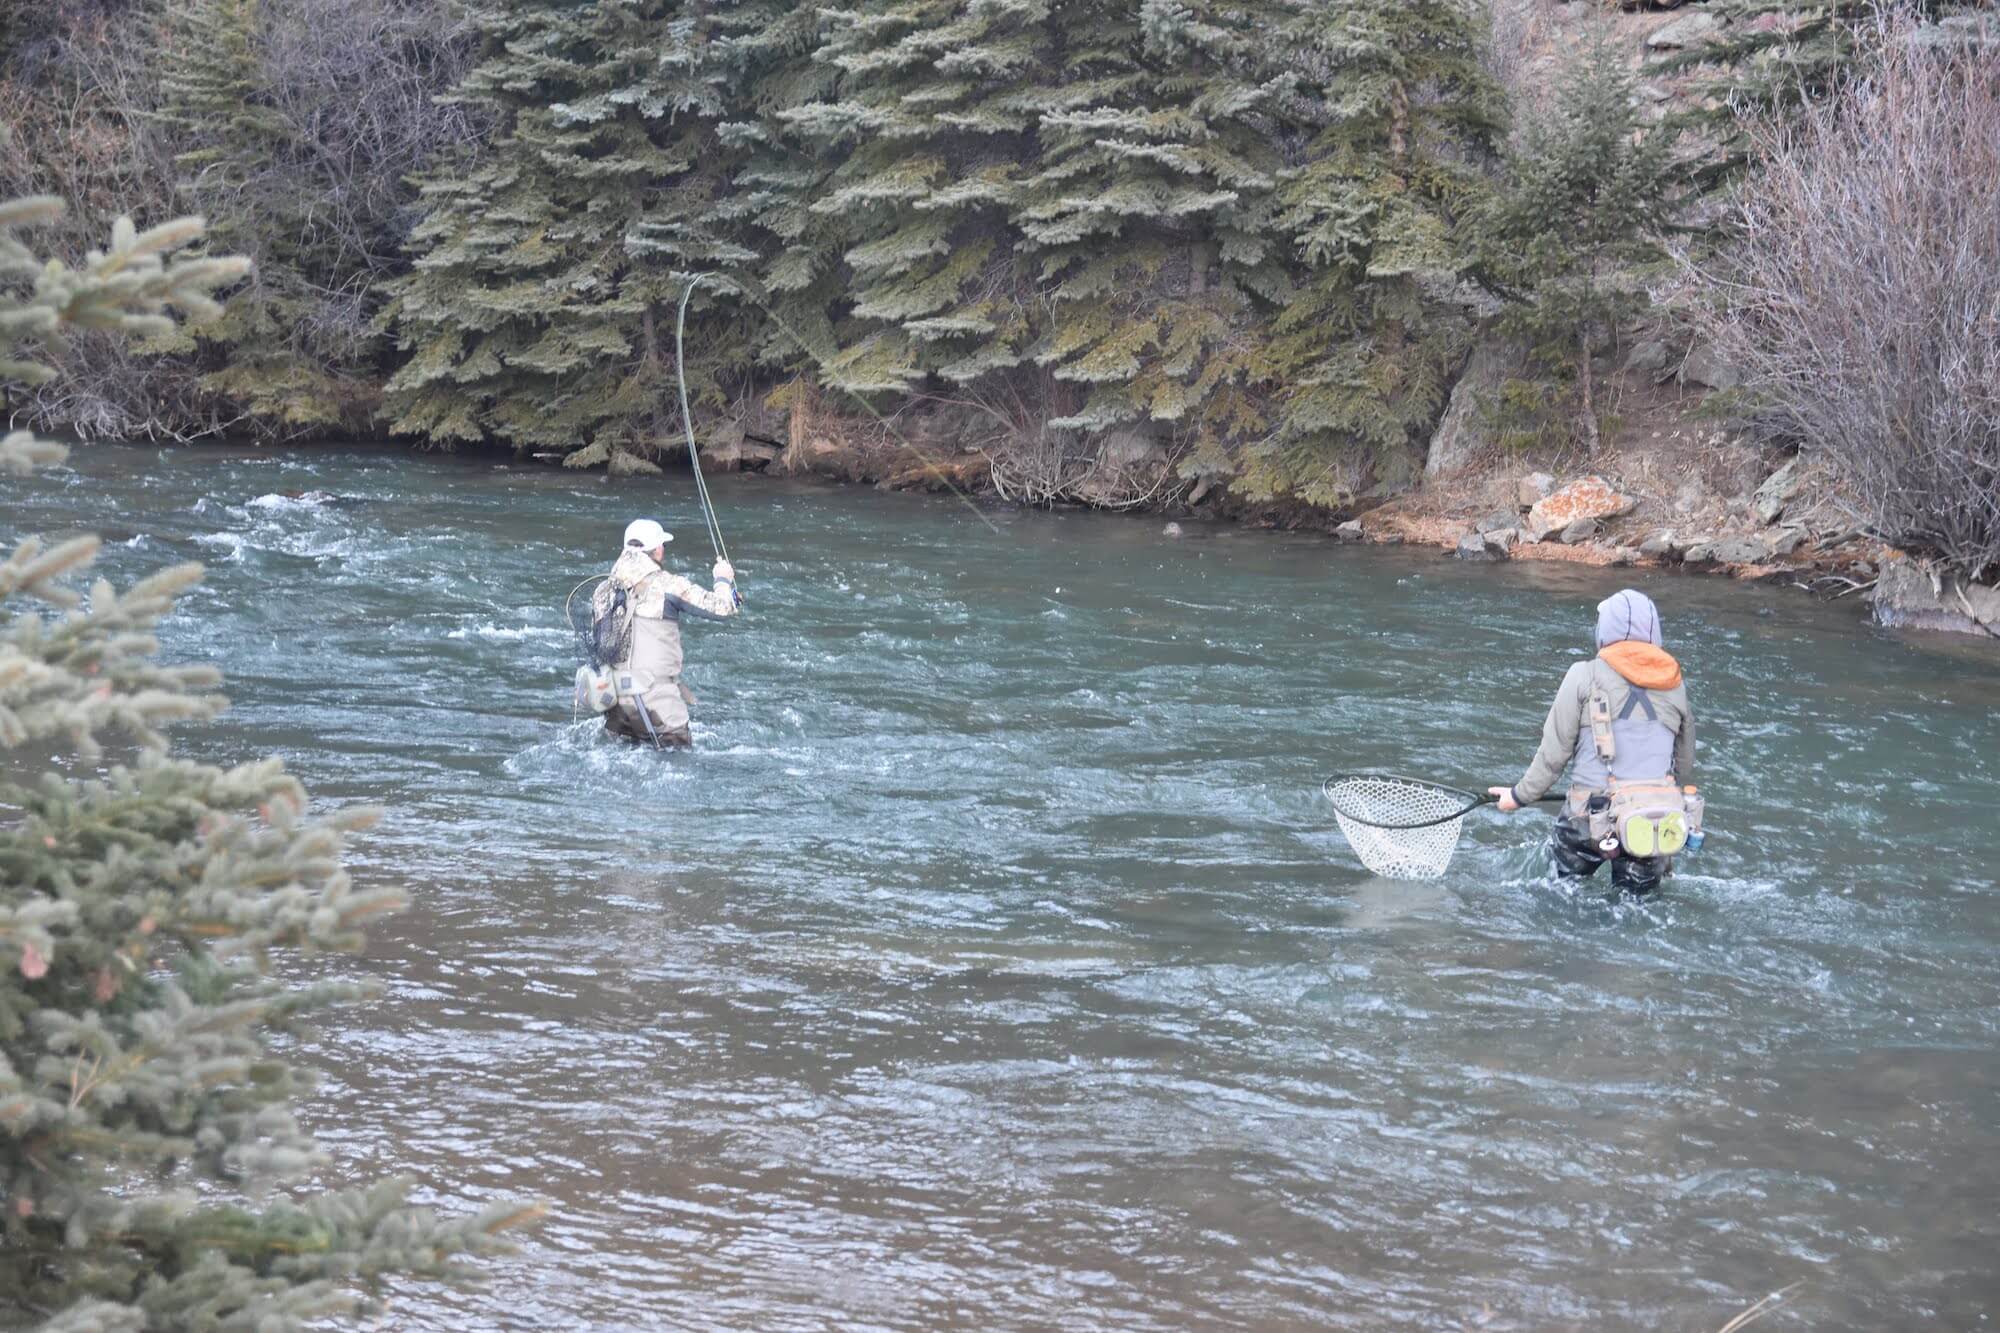 North Fork Ranch Guide Service fly fishing anglers hooked into a large trout on one of our premier private trout waters we offer guided trips on.